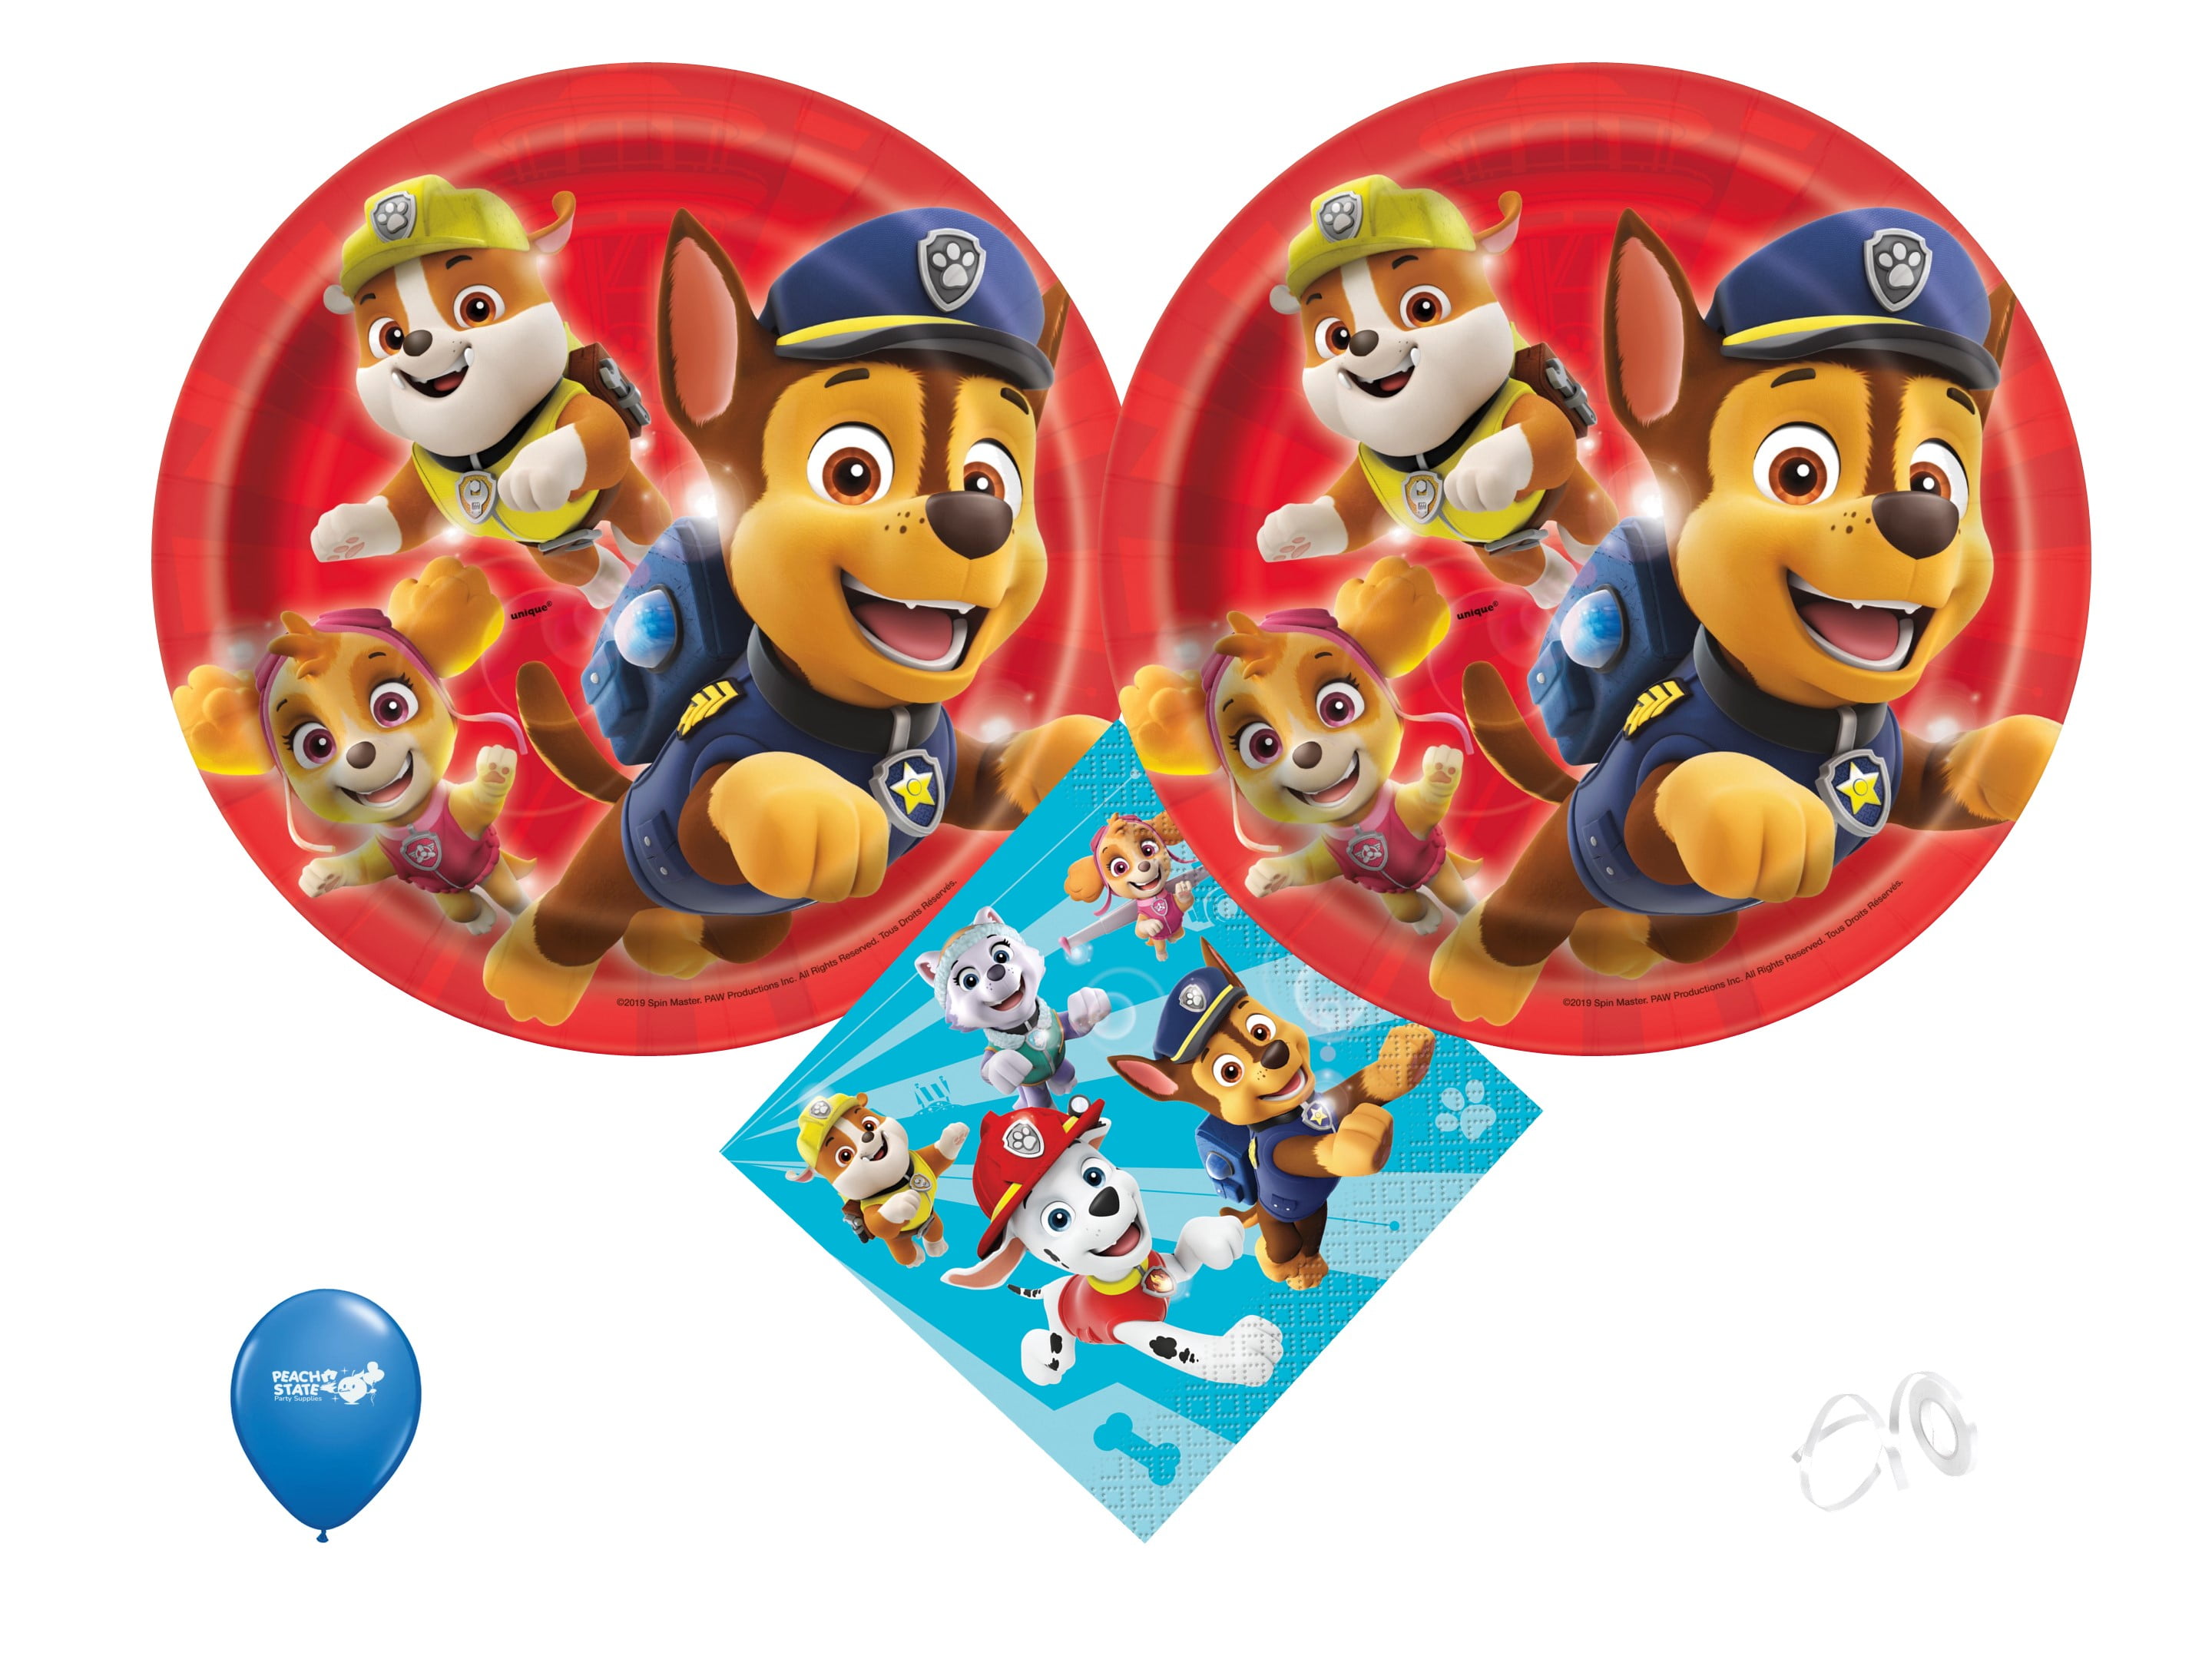 Paw Patrol Party Supplies - Serves 16 - Plates (9)- Napkins- Cups- Paw  Straws - Disposable Kids Birthday Dinnerware Bundle with decorative design  - CH18SLSS47E